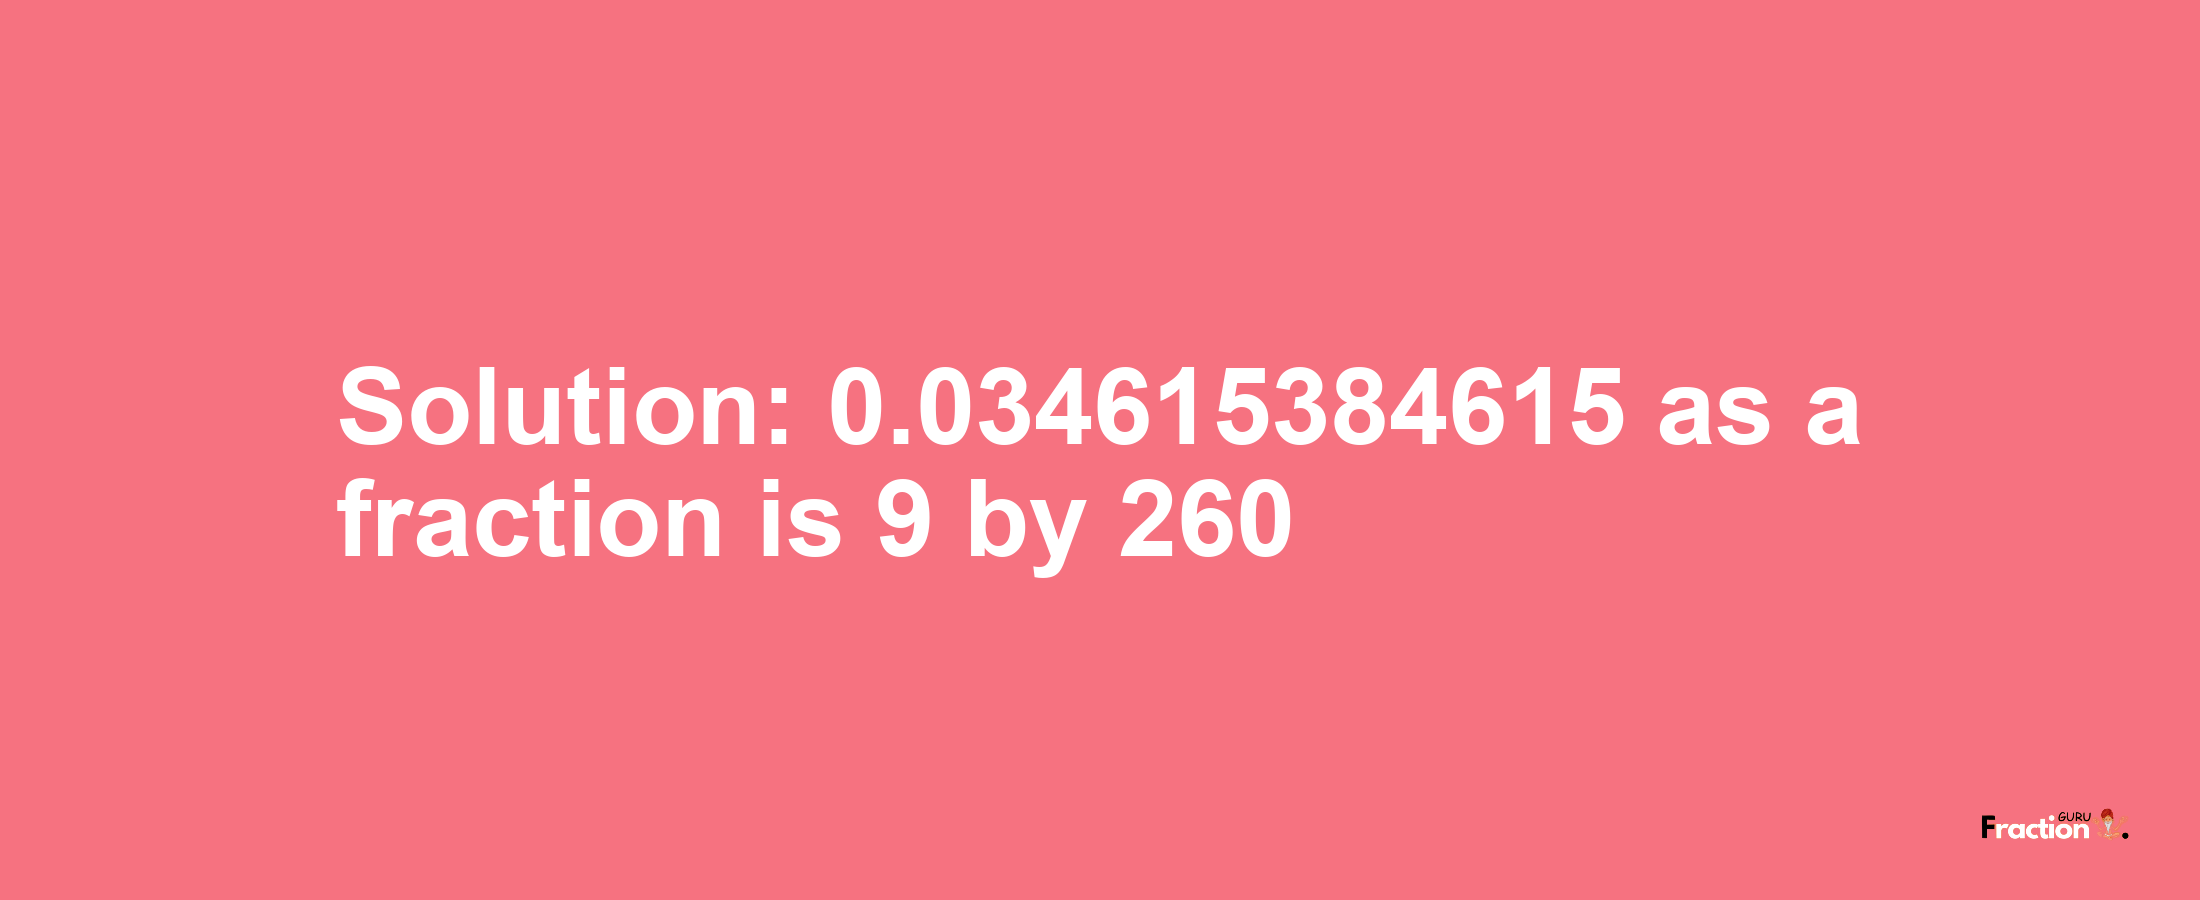 Solution:0.034615384615 as a fraction is 9/260